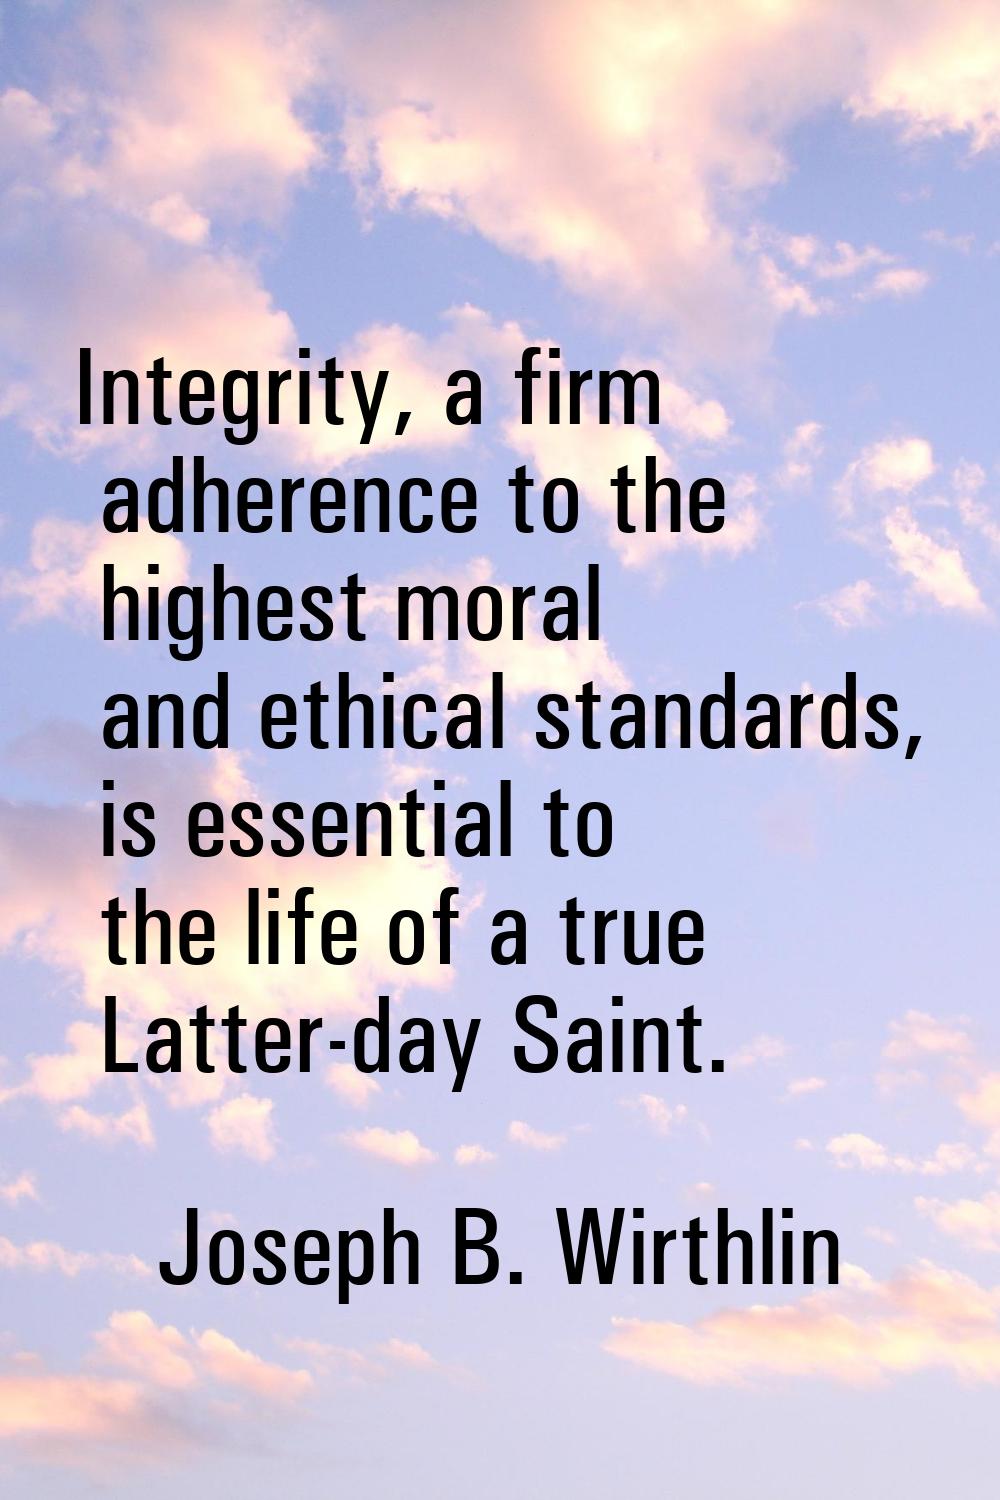 Integrity, a firm adherence to the highest moral and ethical standards, is essential to the life of